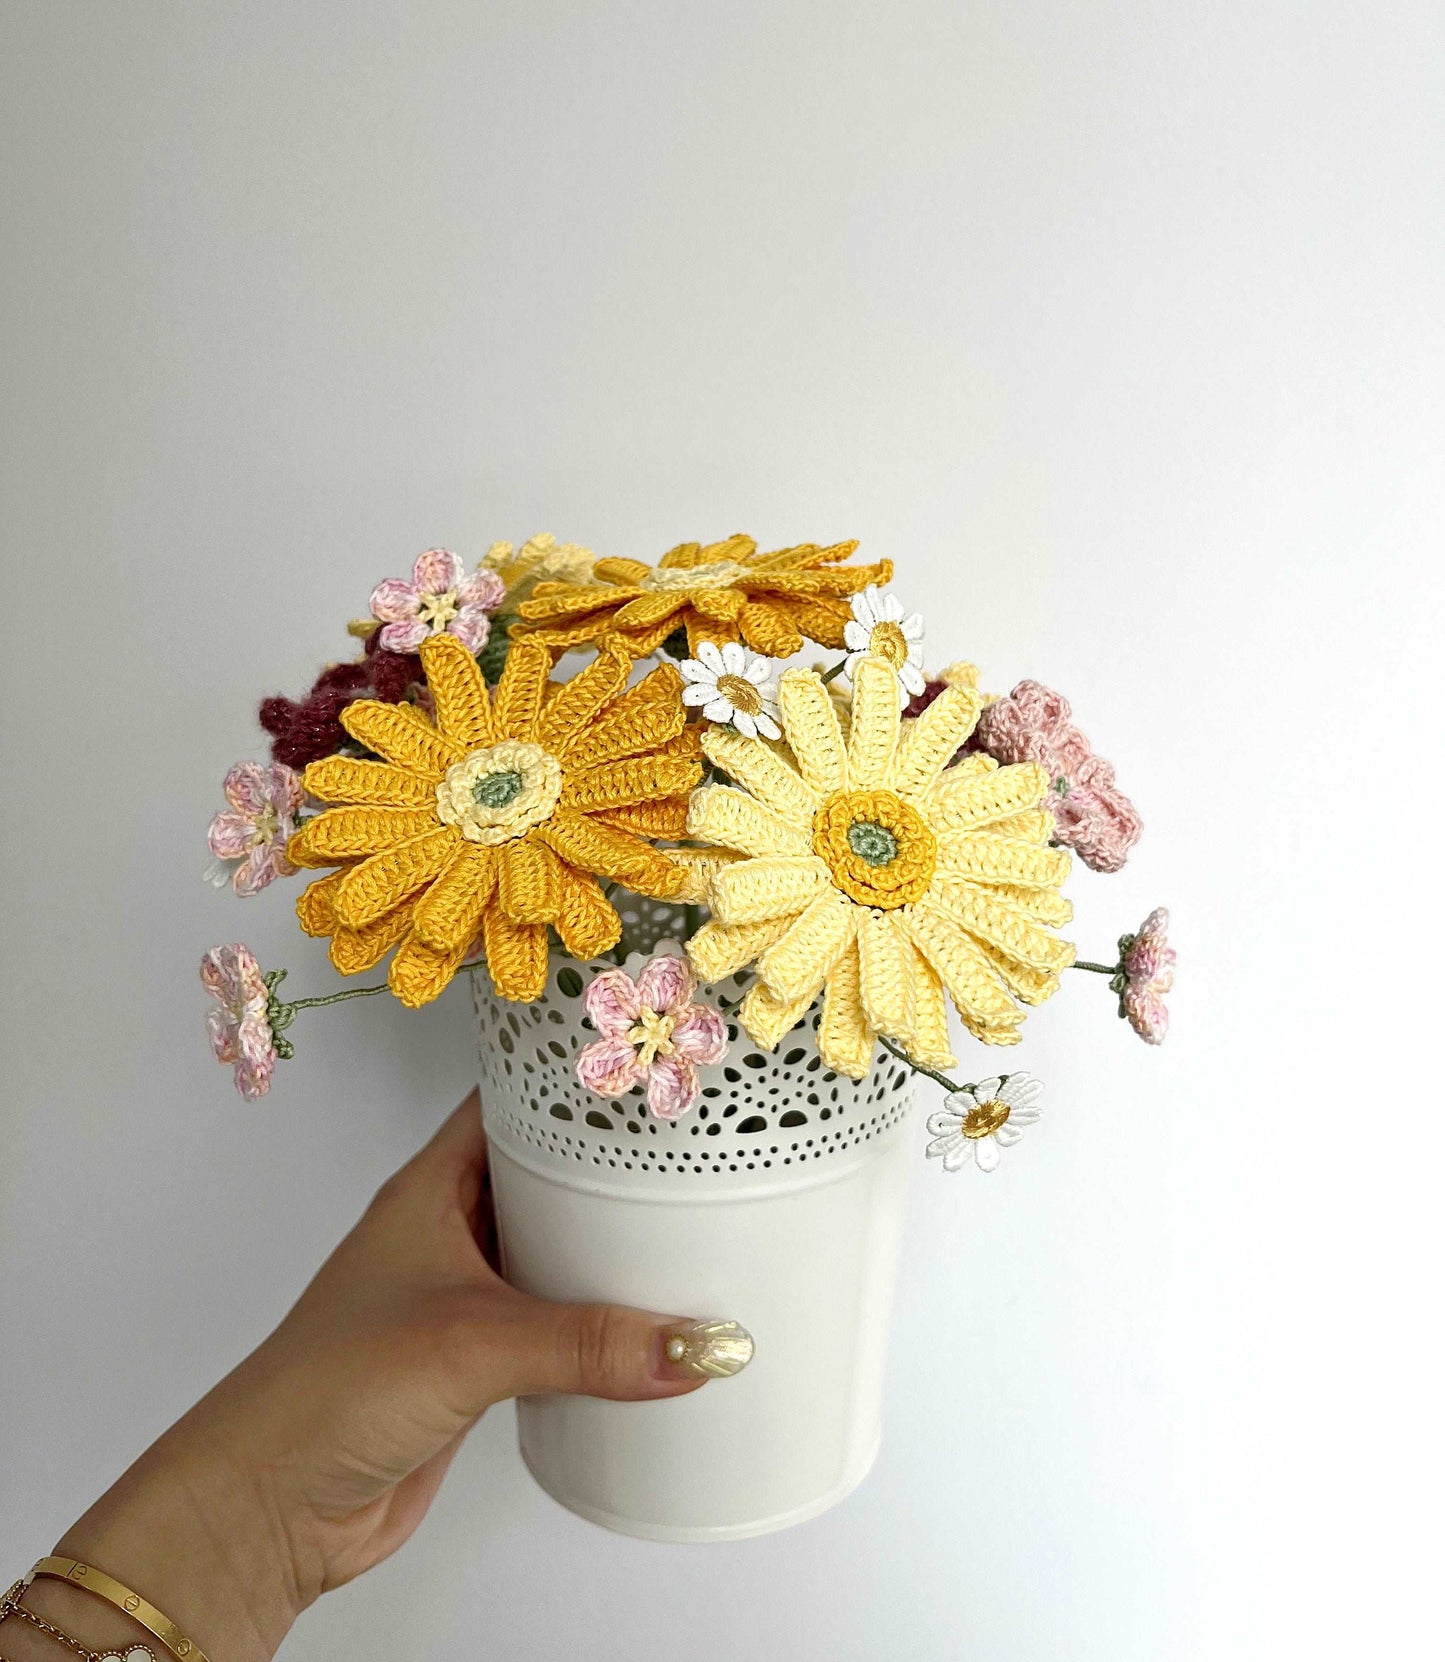 Delicate Handmade Yellow Daisy Floral Arrangement for Gifting